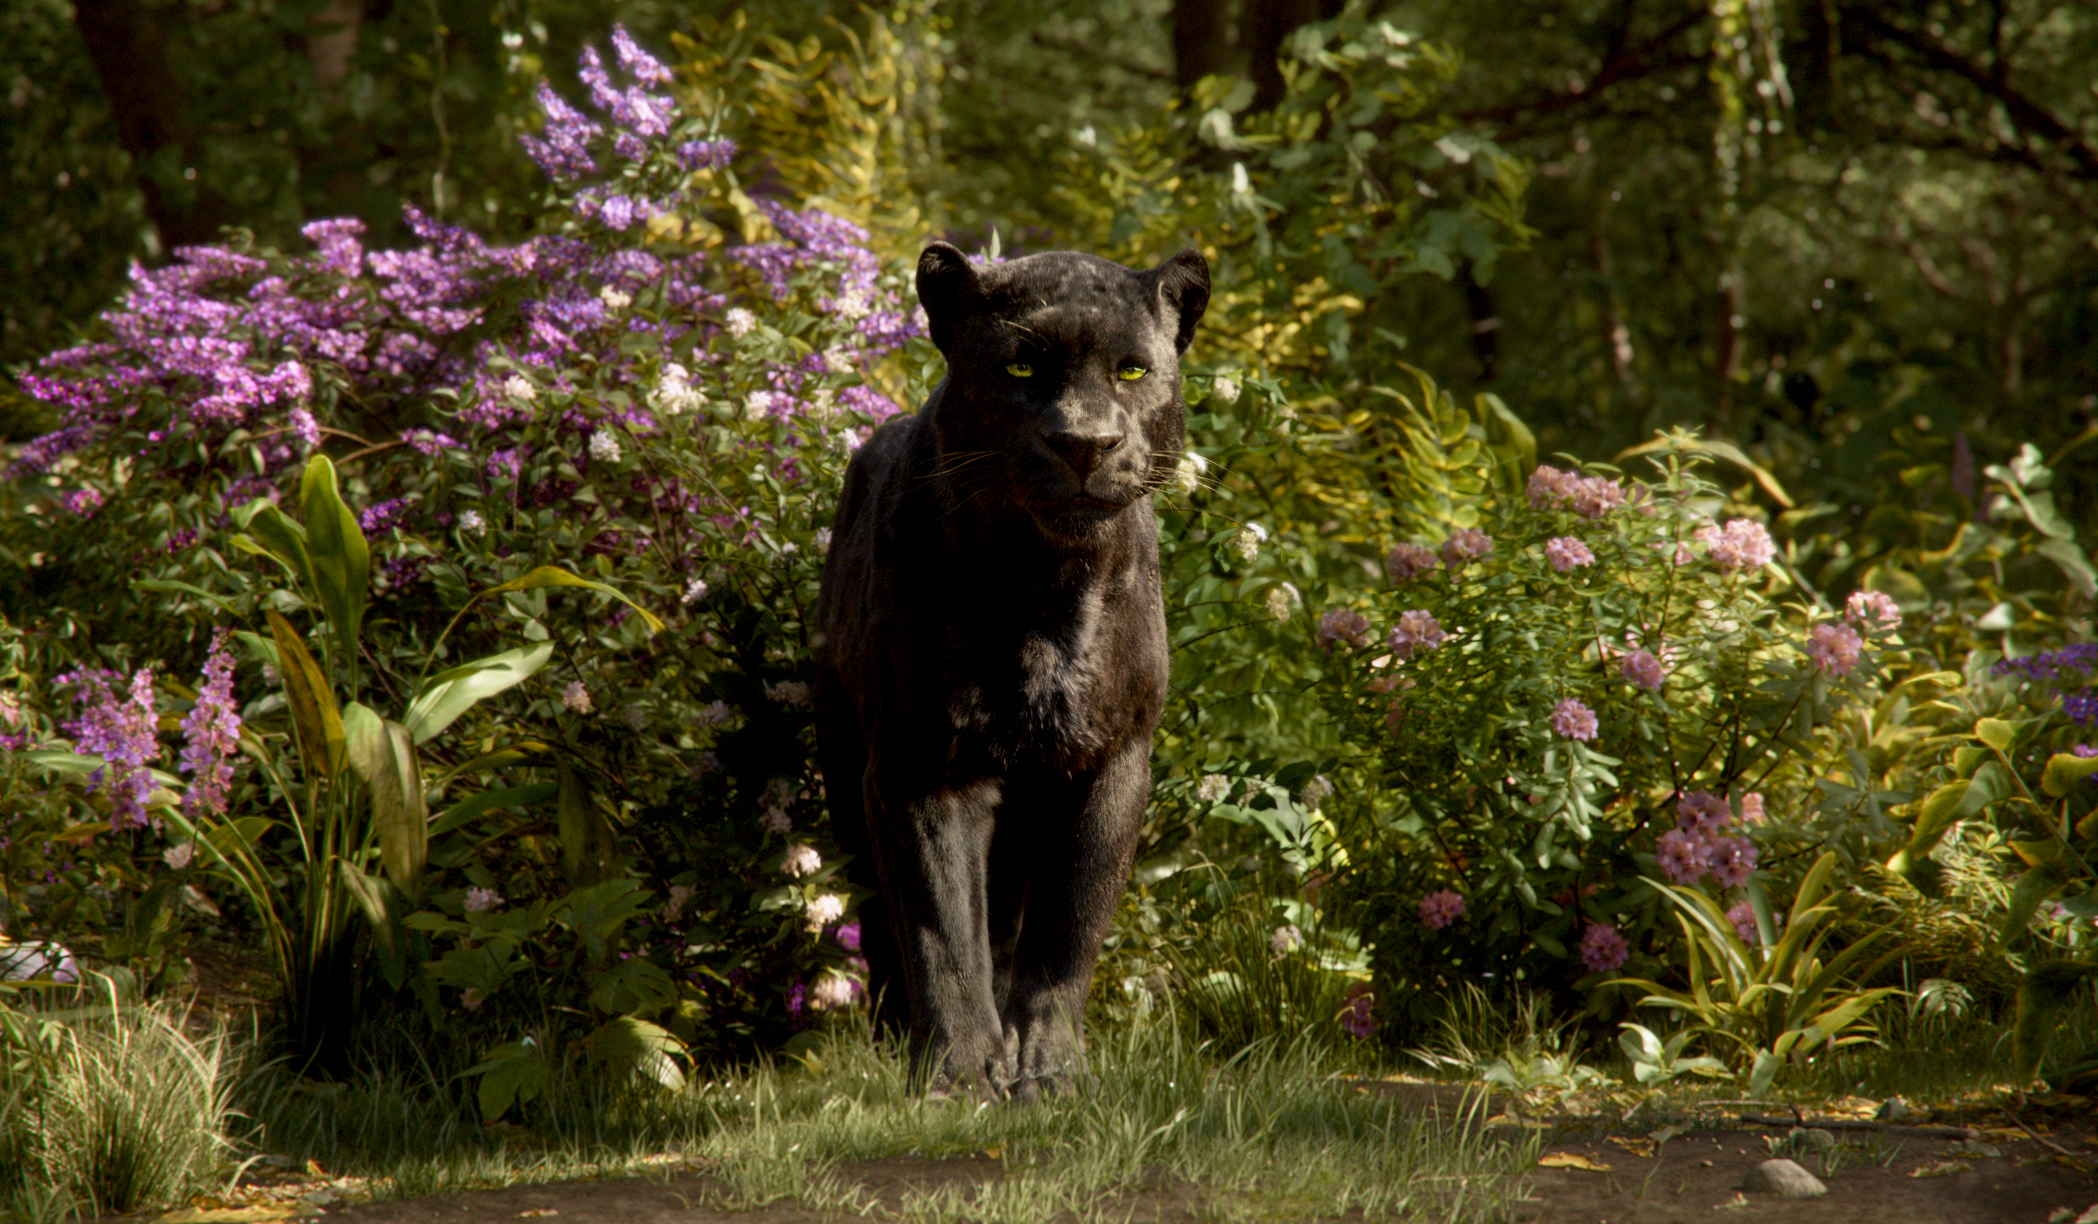 THE JUNGLE BOOK - (PICTURED) BAGHEERA. ©2016 Disney Enterprises, Inc. All Rights Reserved.